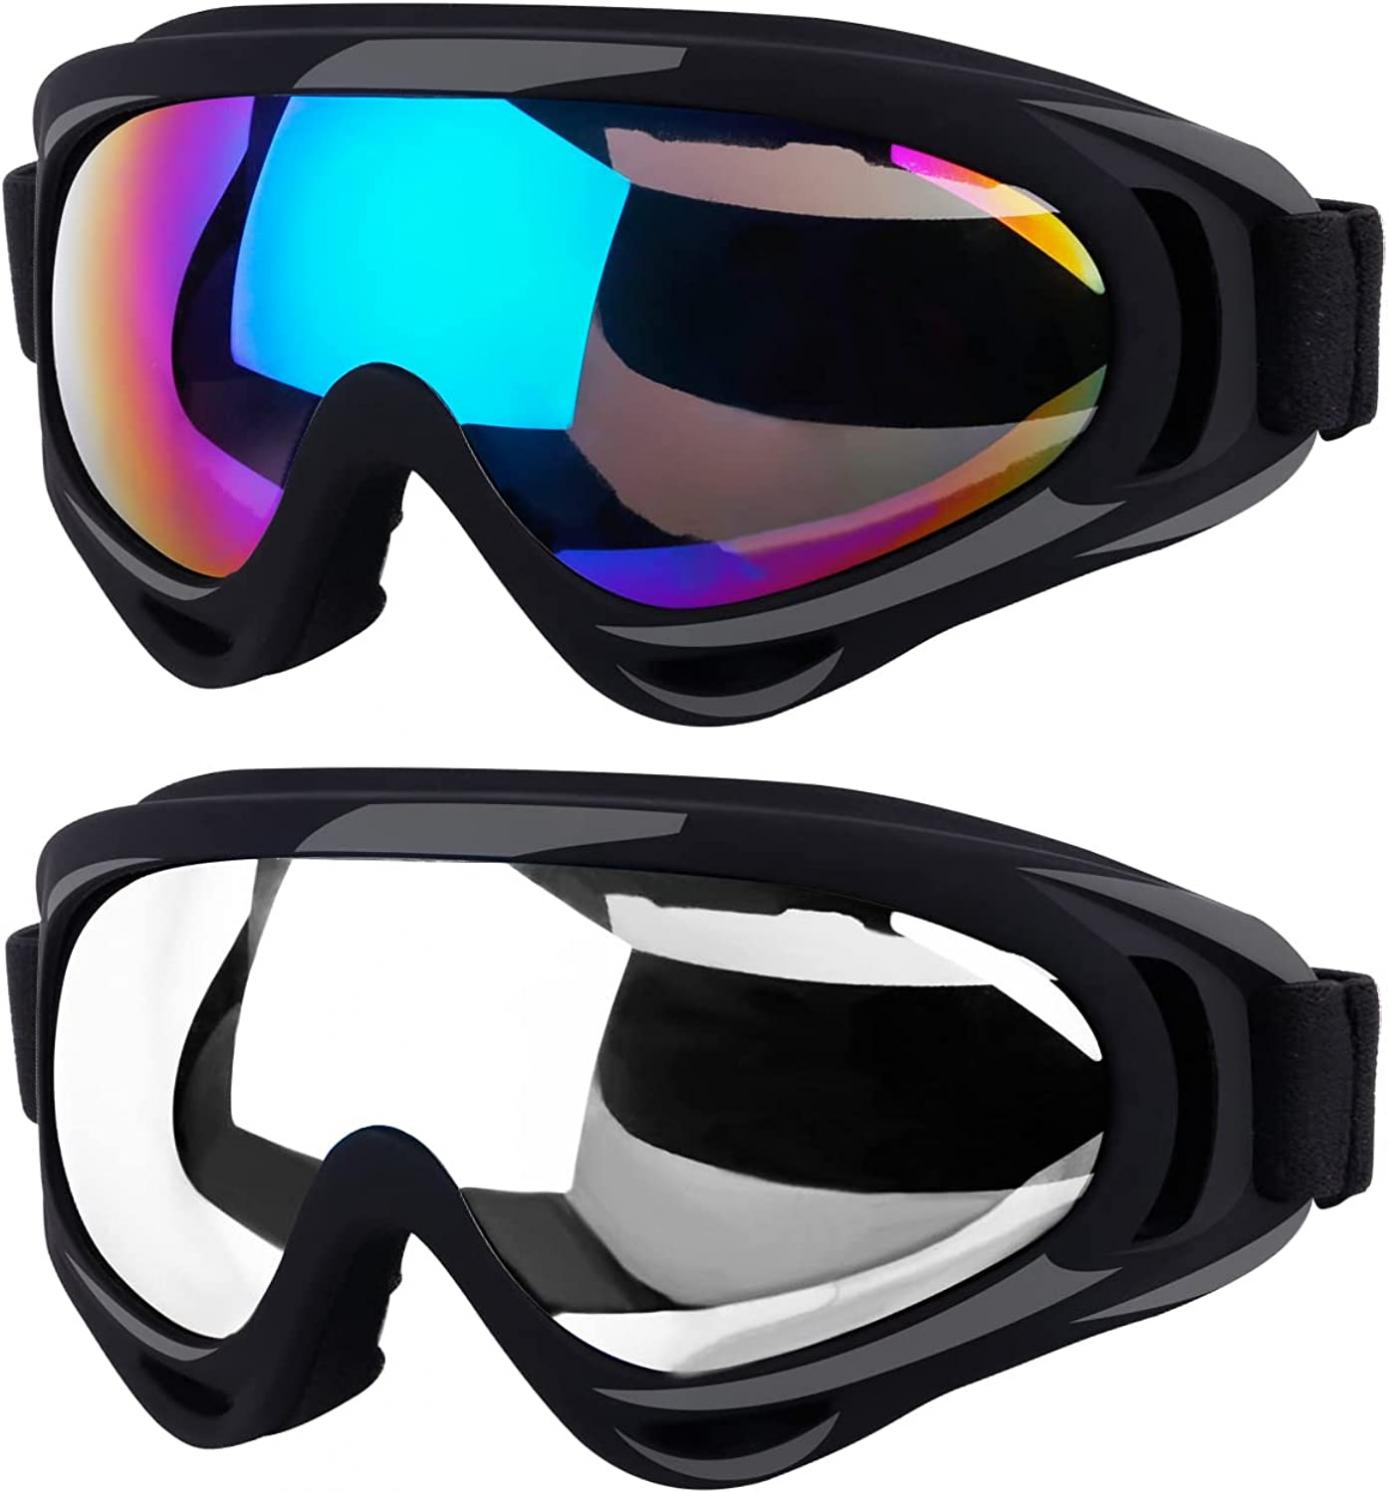 Elimoons Ski Goggles, 2 Pack Snowboard Goggles for Men Women Kids,Anti-fog UV Protection Snow Motorcycle Goggles Youth Adult